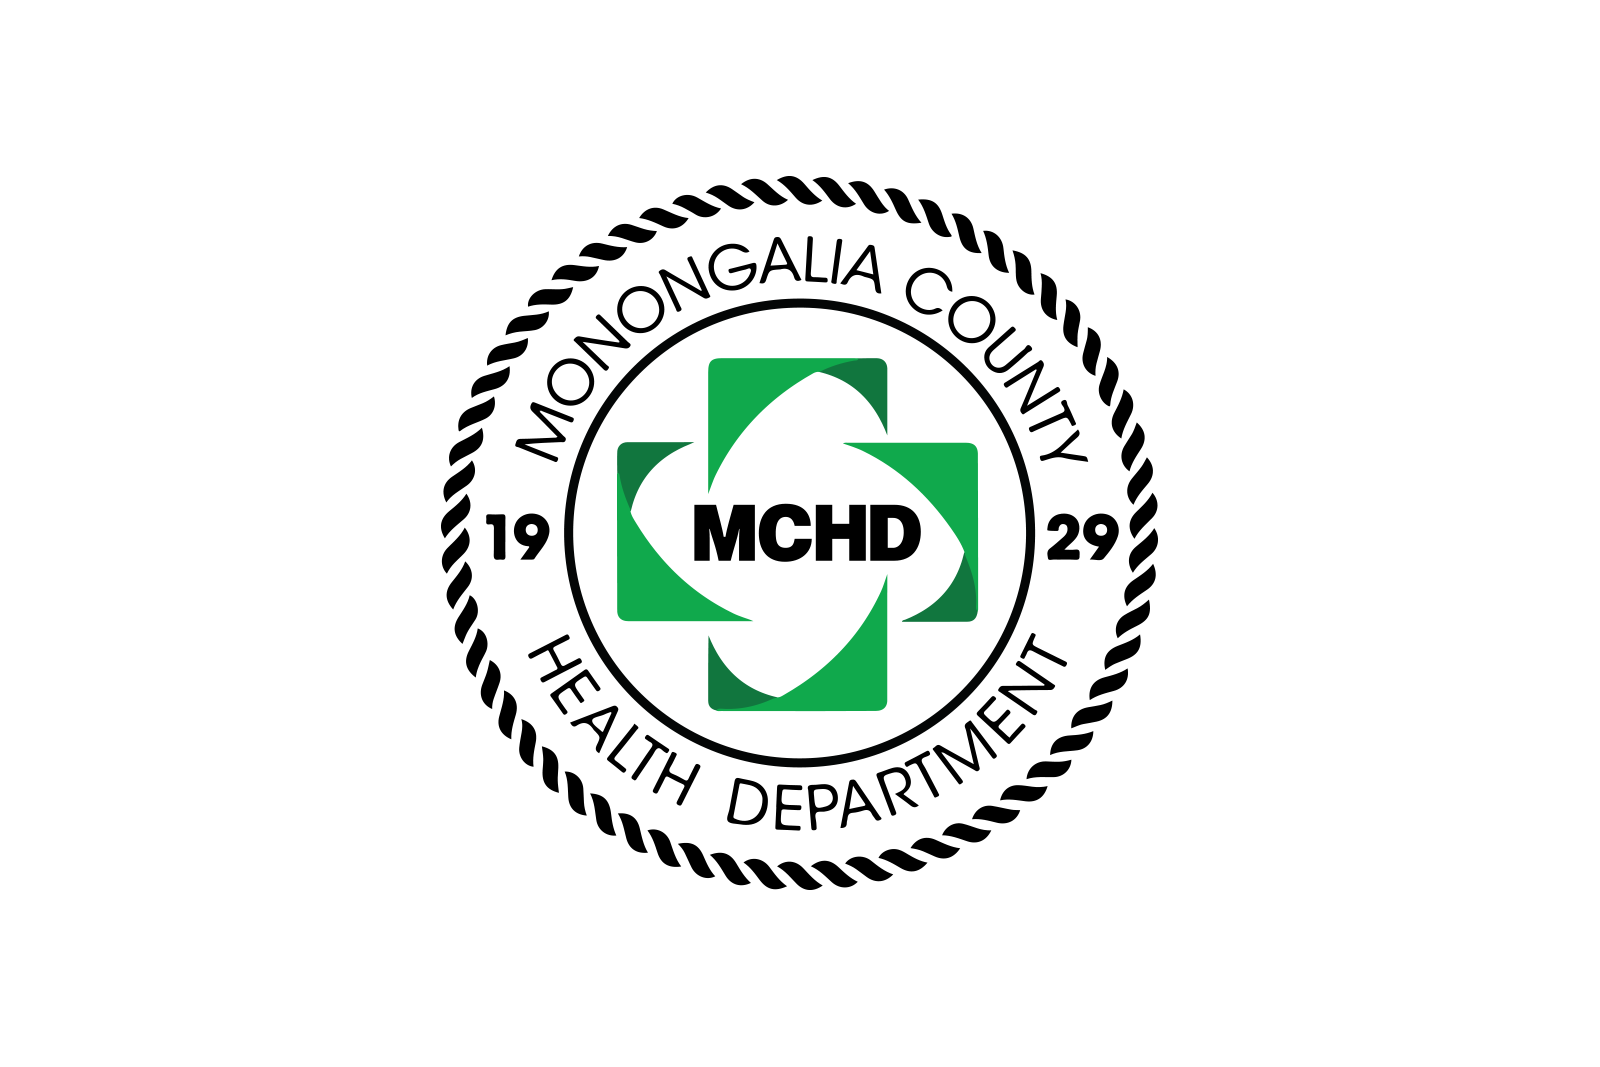 MCHD Board of Health meeting to be held at 9 a.m. Sept. 28